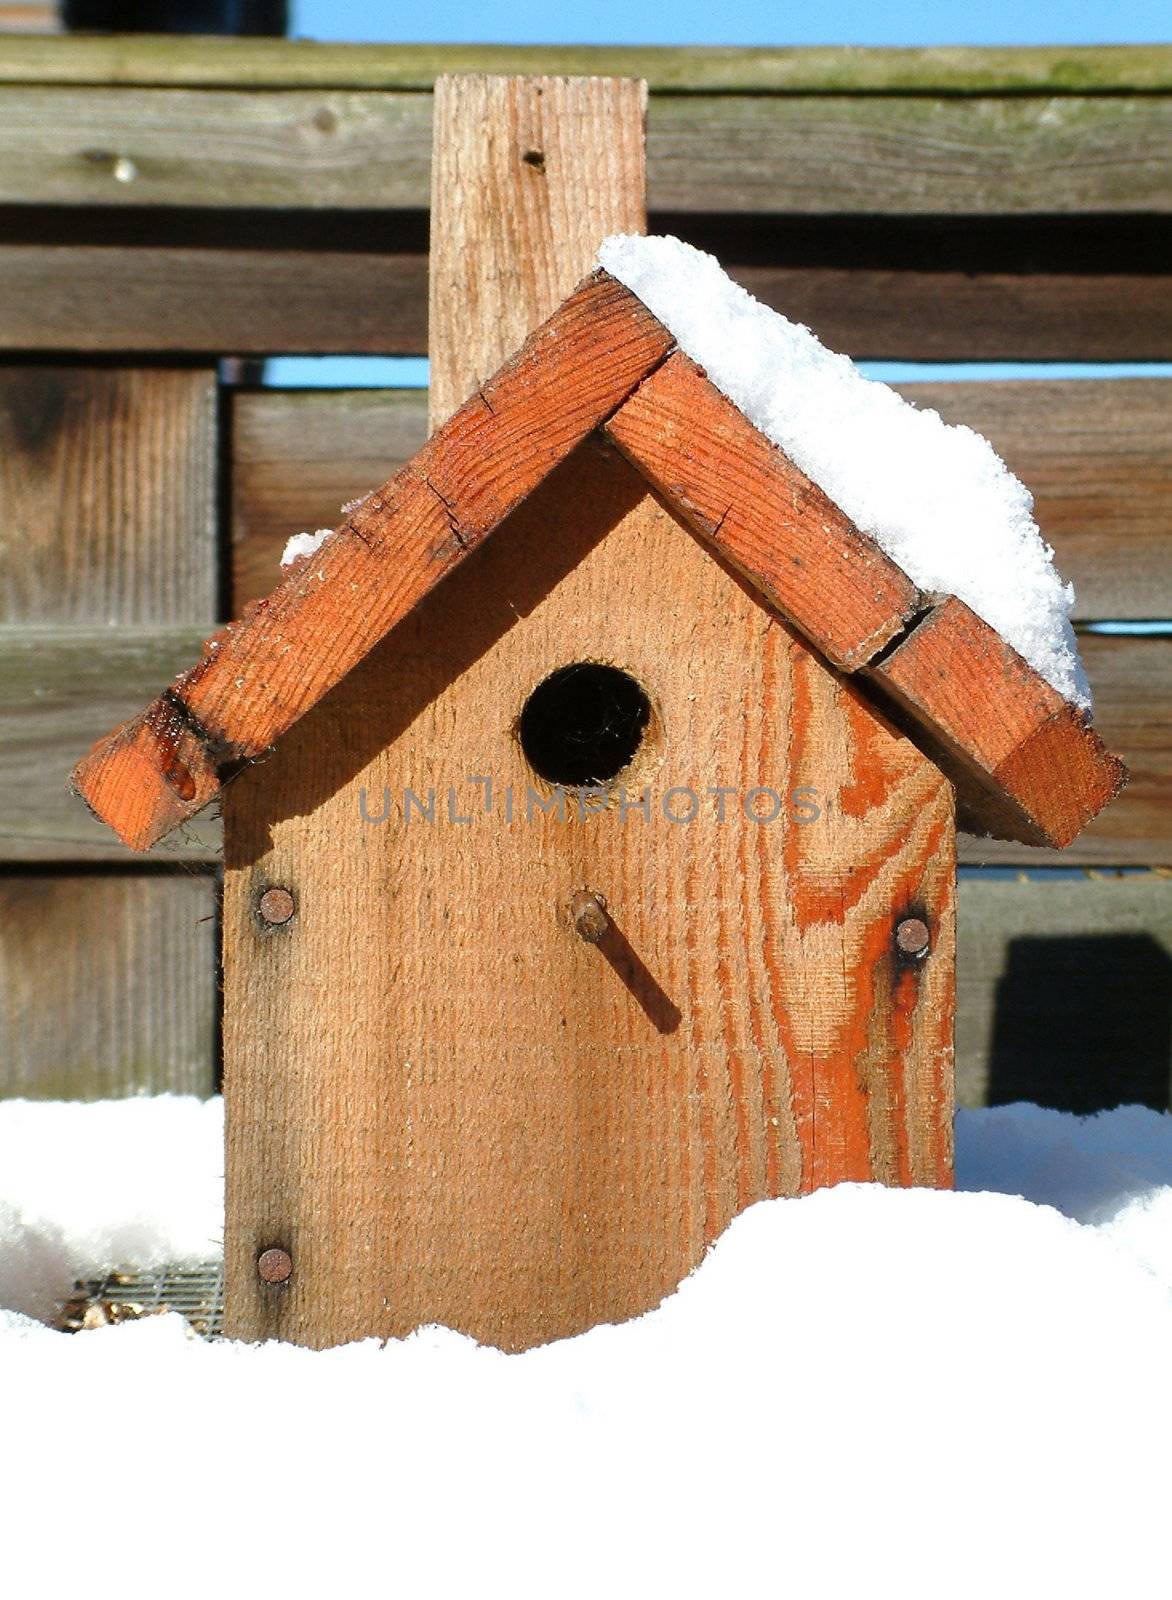 blue tit box for the birds away from the snow